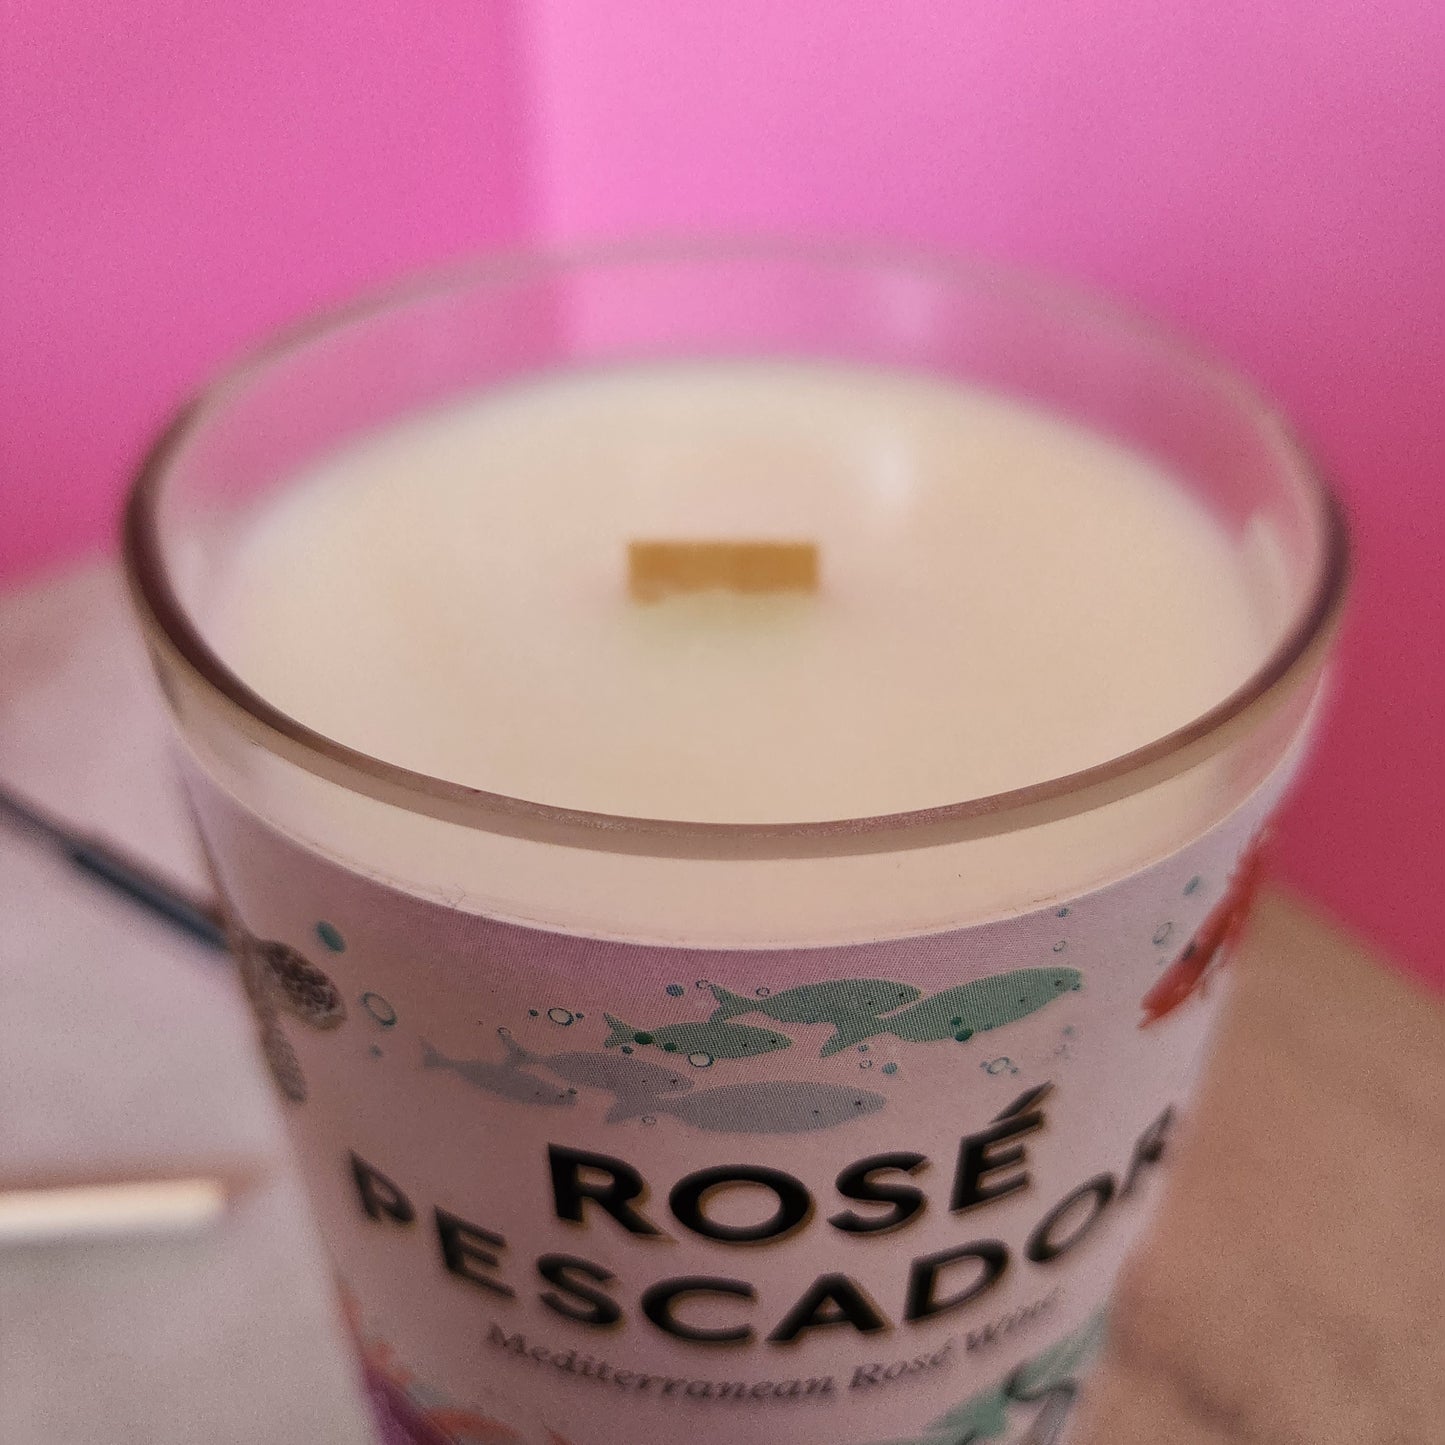 "Mimosa" Scented Candle in a Recycled "Rose' Pescador" Wine Bottle